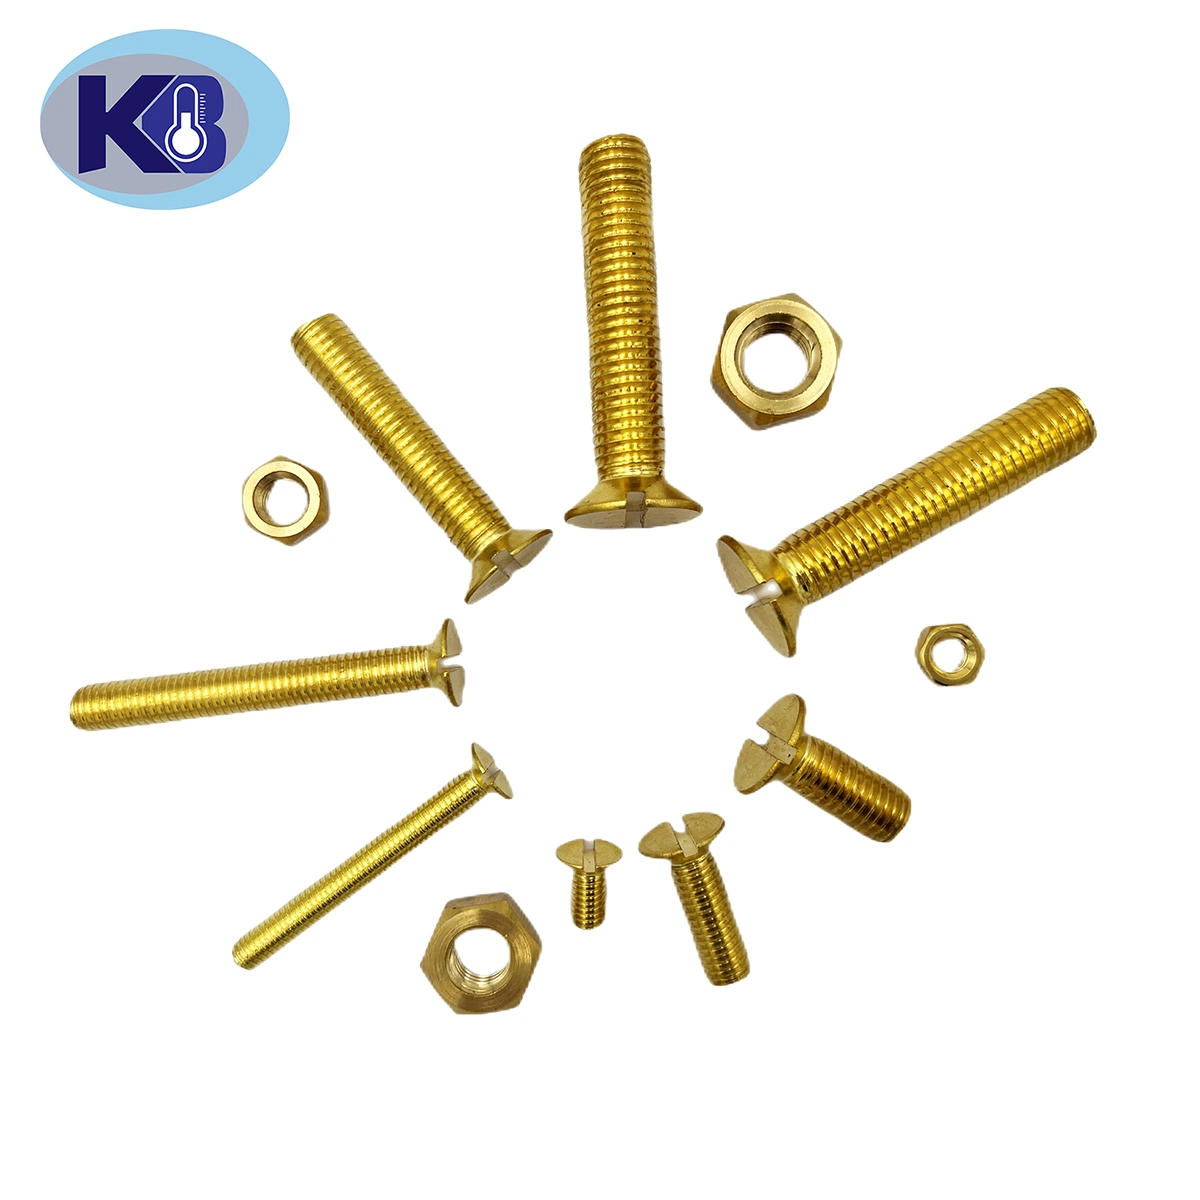 Stainless Steel Bolts/Hexagon Head Bolt and Nut/Carriage Bolt/U Bolt/ Hex Flange Bolt/Anchor Bolt /Eye Bolt/Hex Flange Nuts/Flat Washer/Spring Washer/Stud Bolts